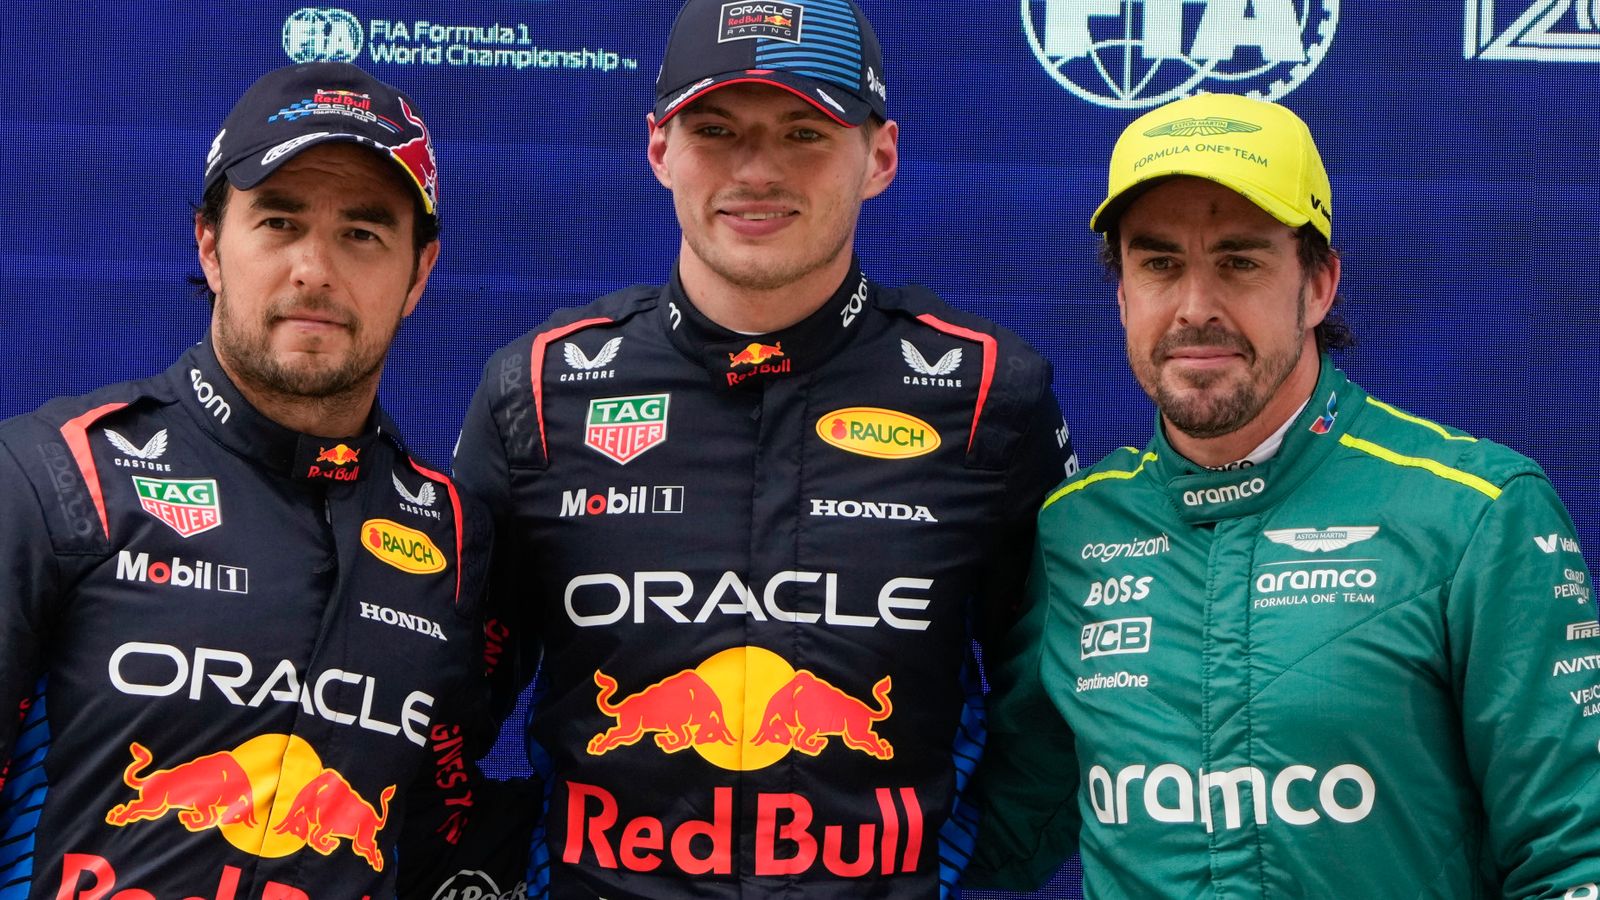 Chinese GP Qualifying: Max Verstappen continues pole position run but Lewis Hamilton in shock early exit